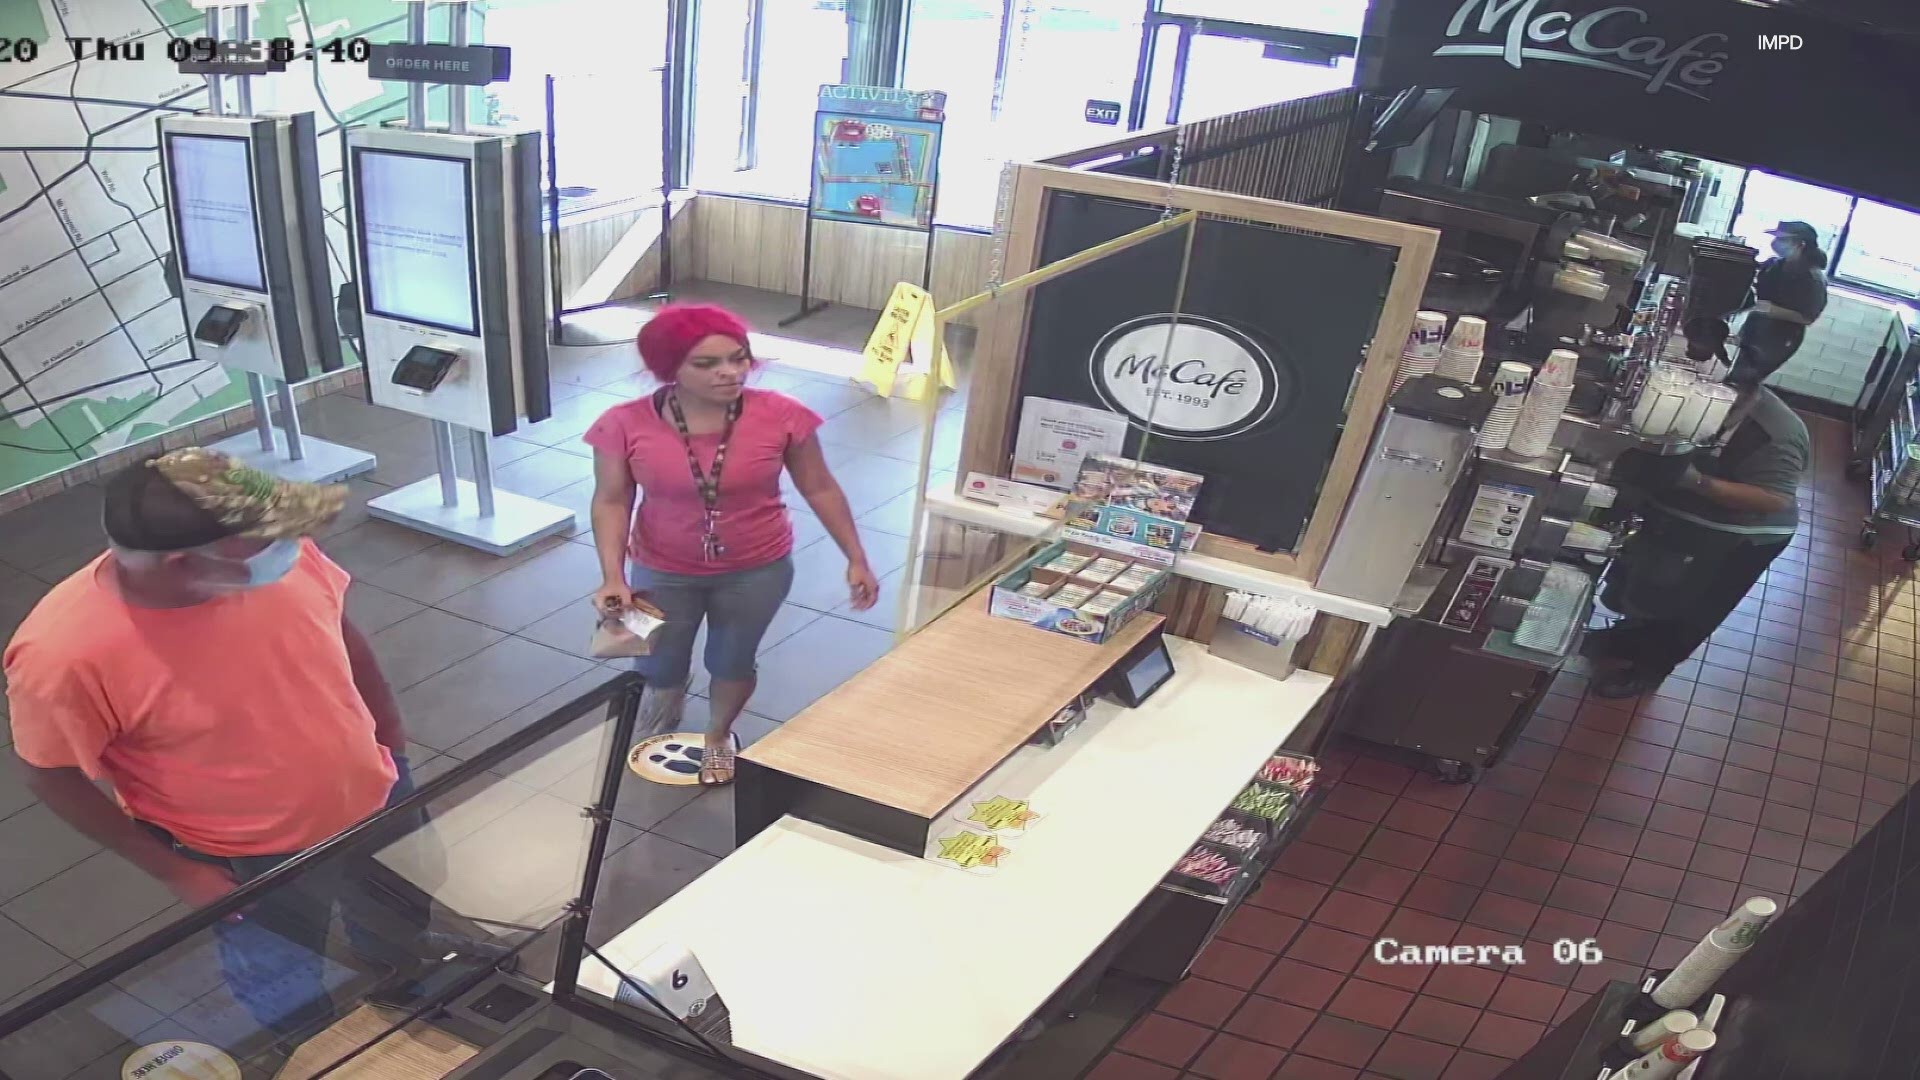 IMPD is looking for a woman who went on a violent tirade at an east Indianapolis McDonald's August 6 over what she said was a mistake in her drive-thru order.